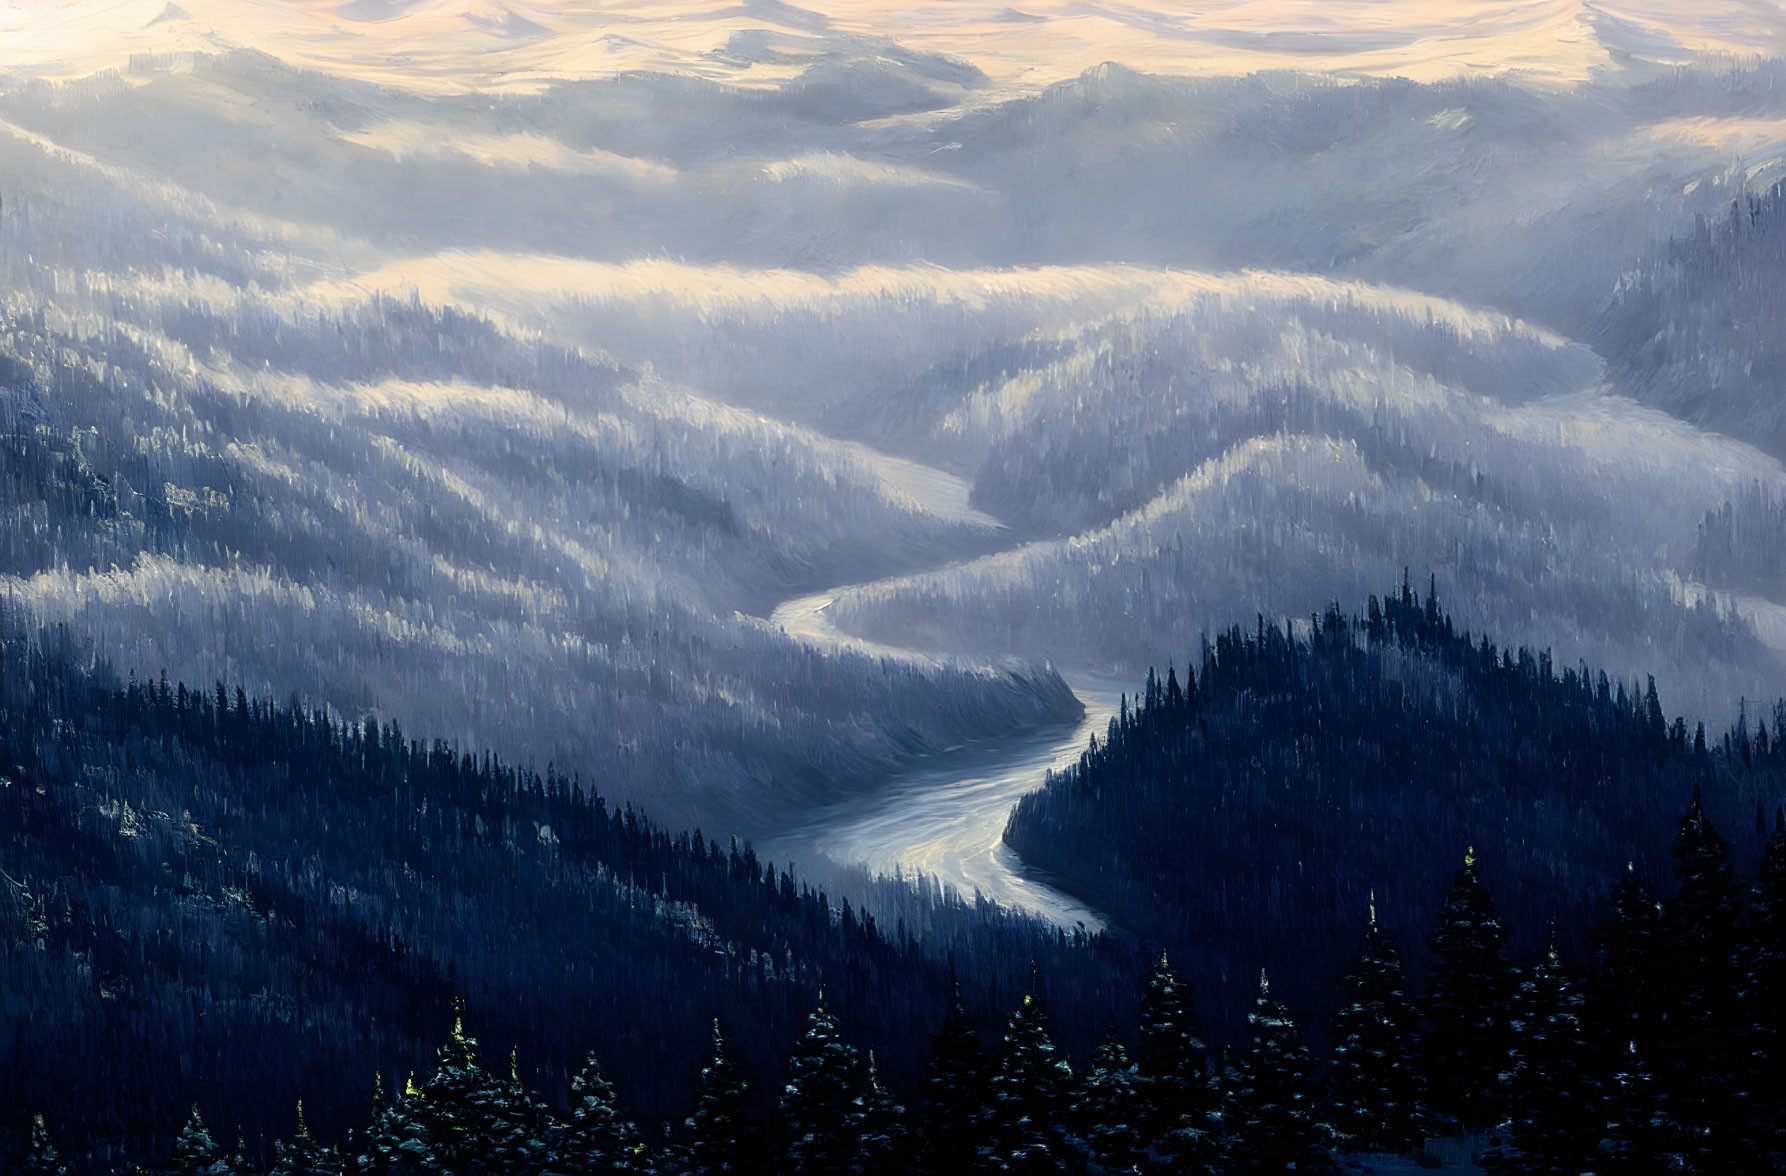 Snowy Mountain Landscape Painting with River and Pine Trees